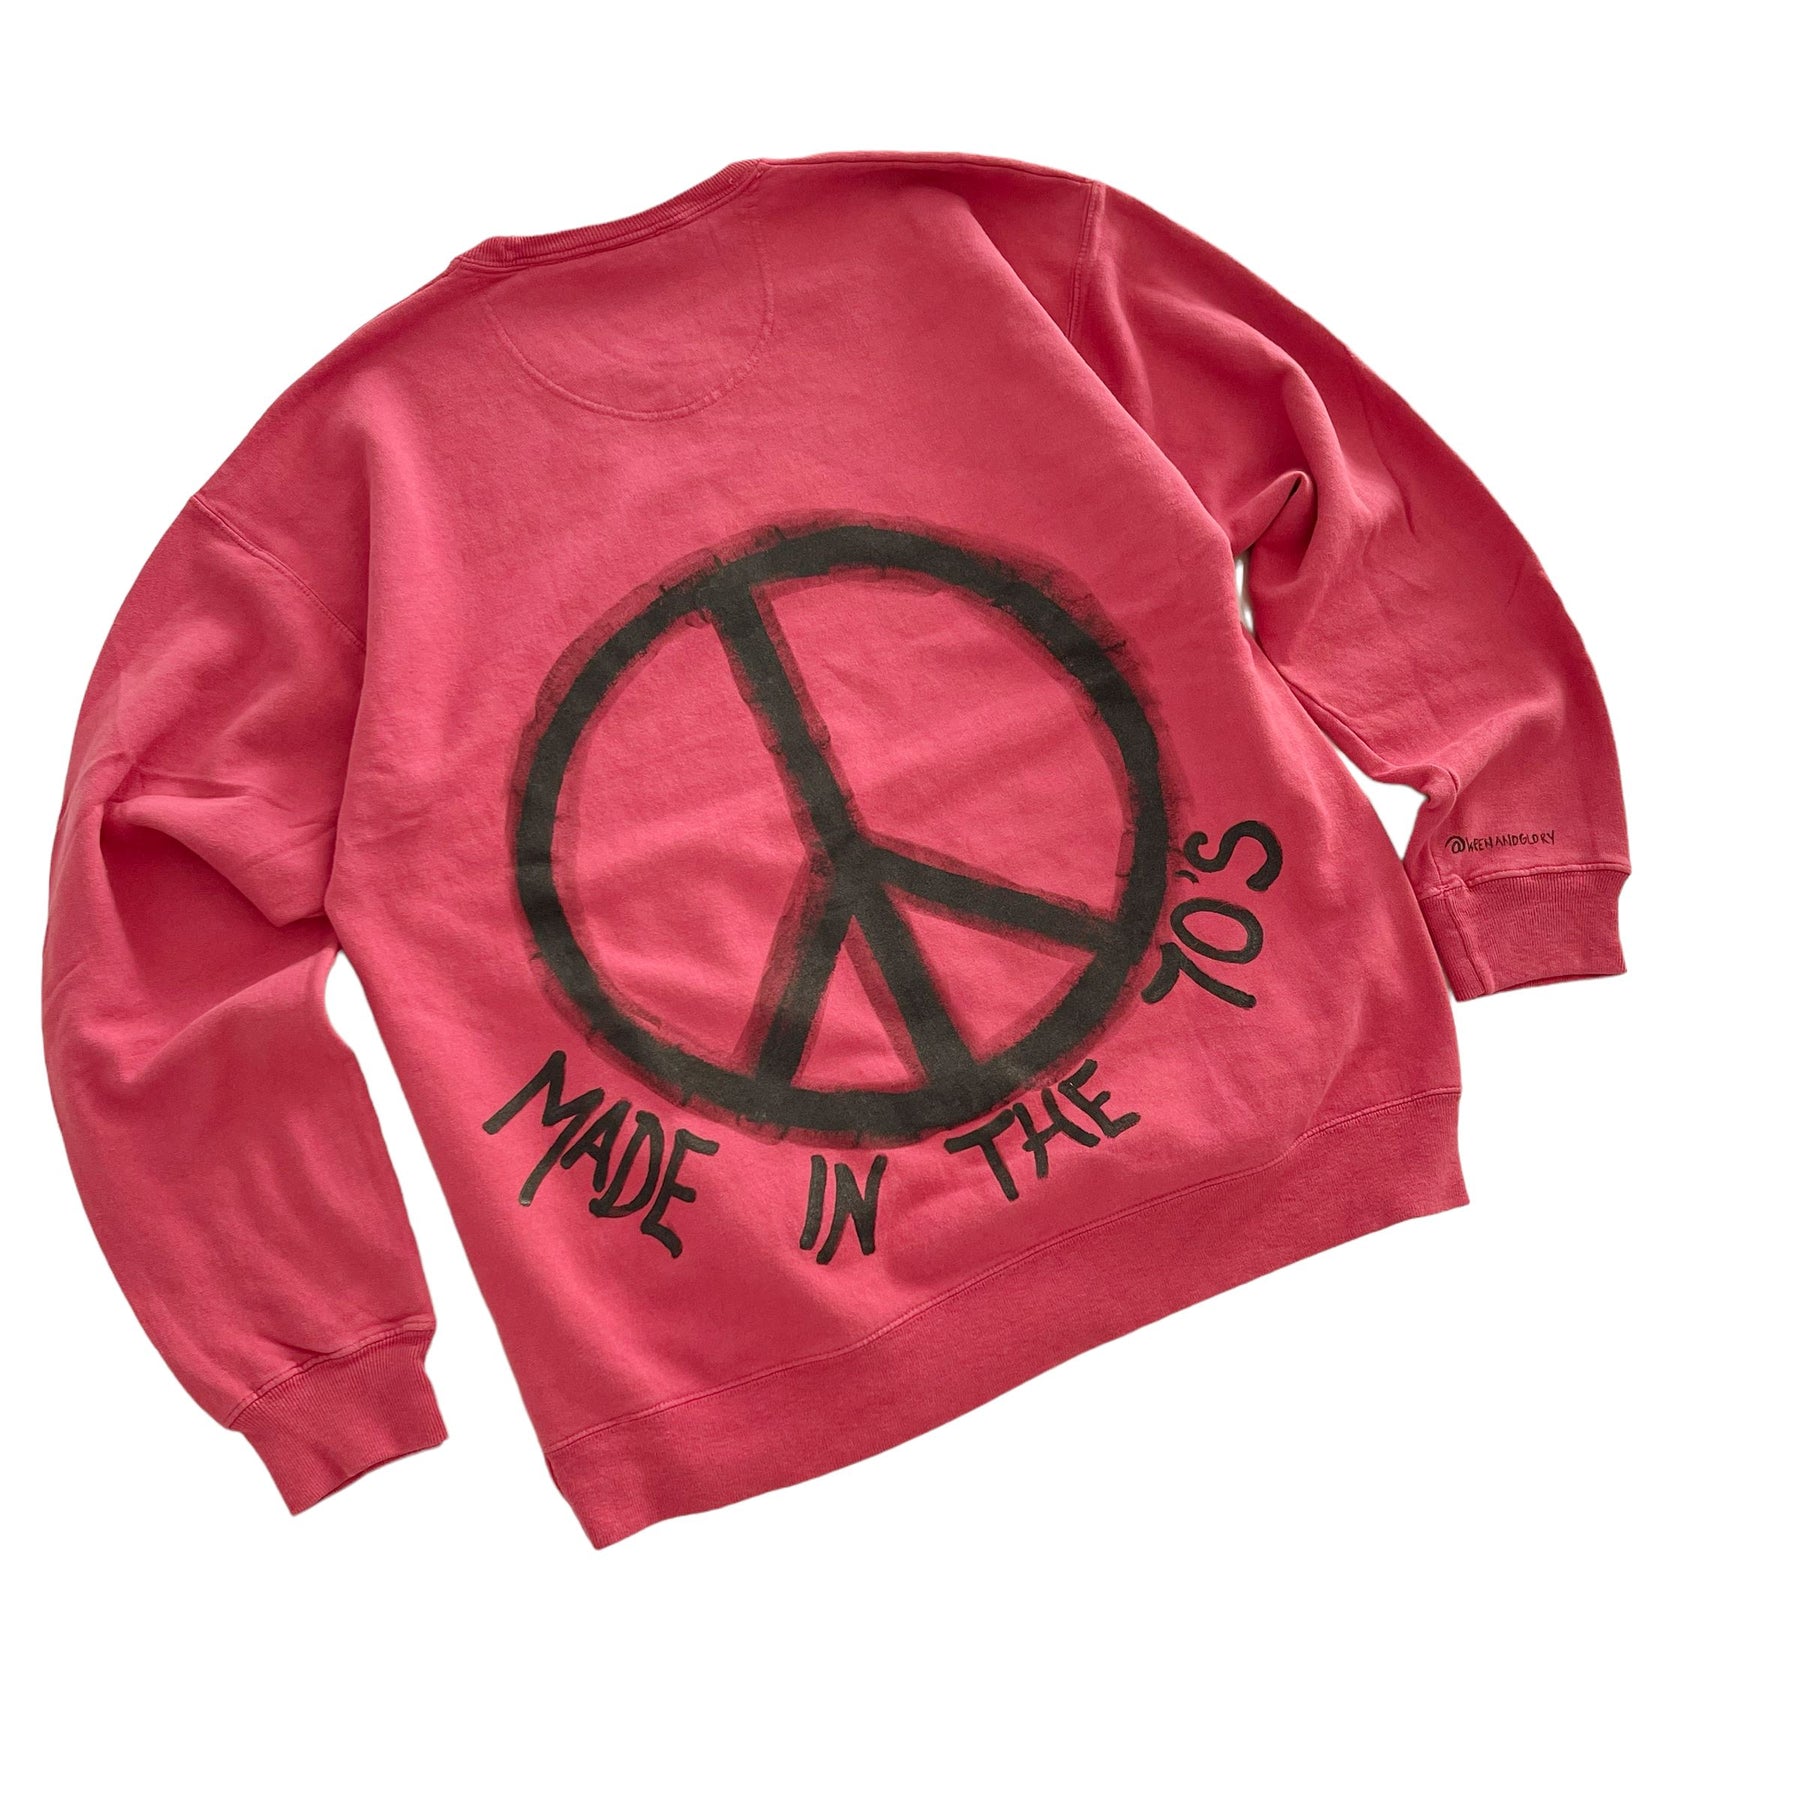 '70s Baby!' Painted Red Crewneck